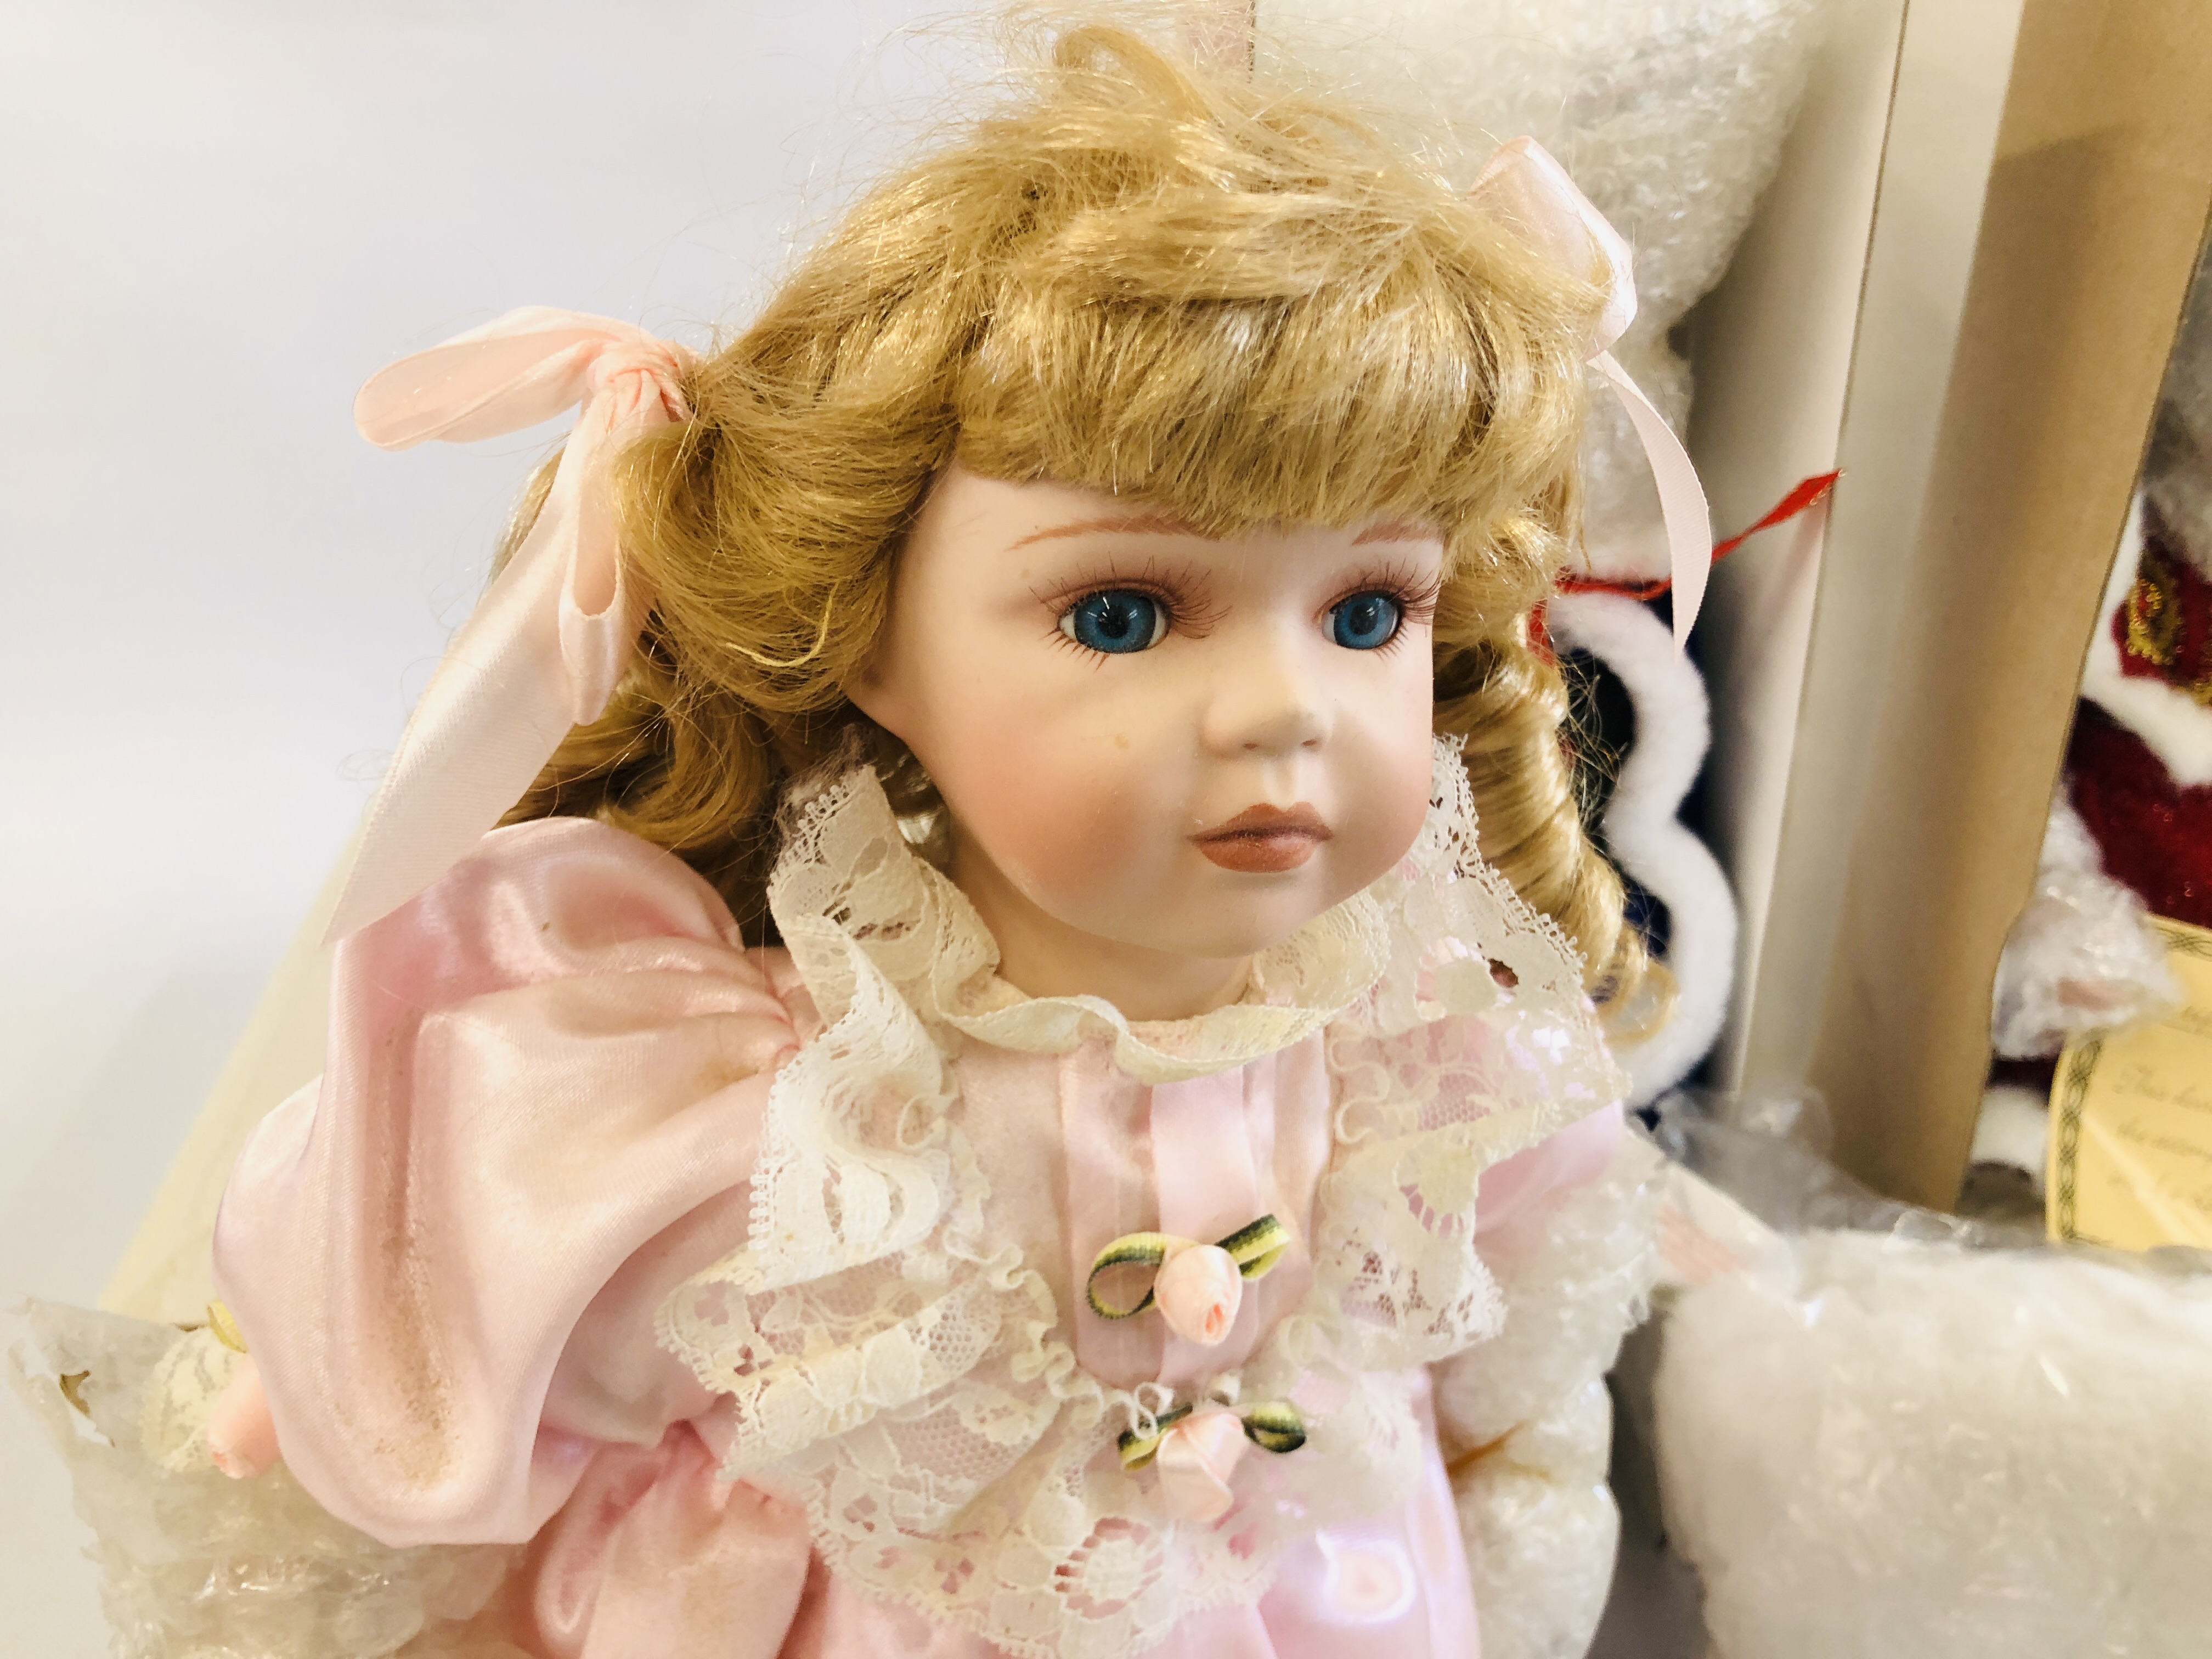 TWO "KLEENEZE" CHINA DOLLS TO INCLUDE "CHRISTMAS EVE" AND CHRISTABELLE + A FURTHER UNRELATED - Image 2 of 6